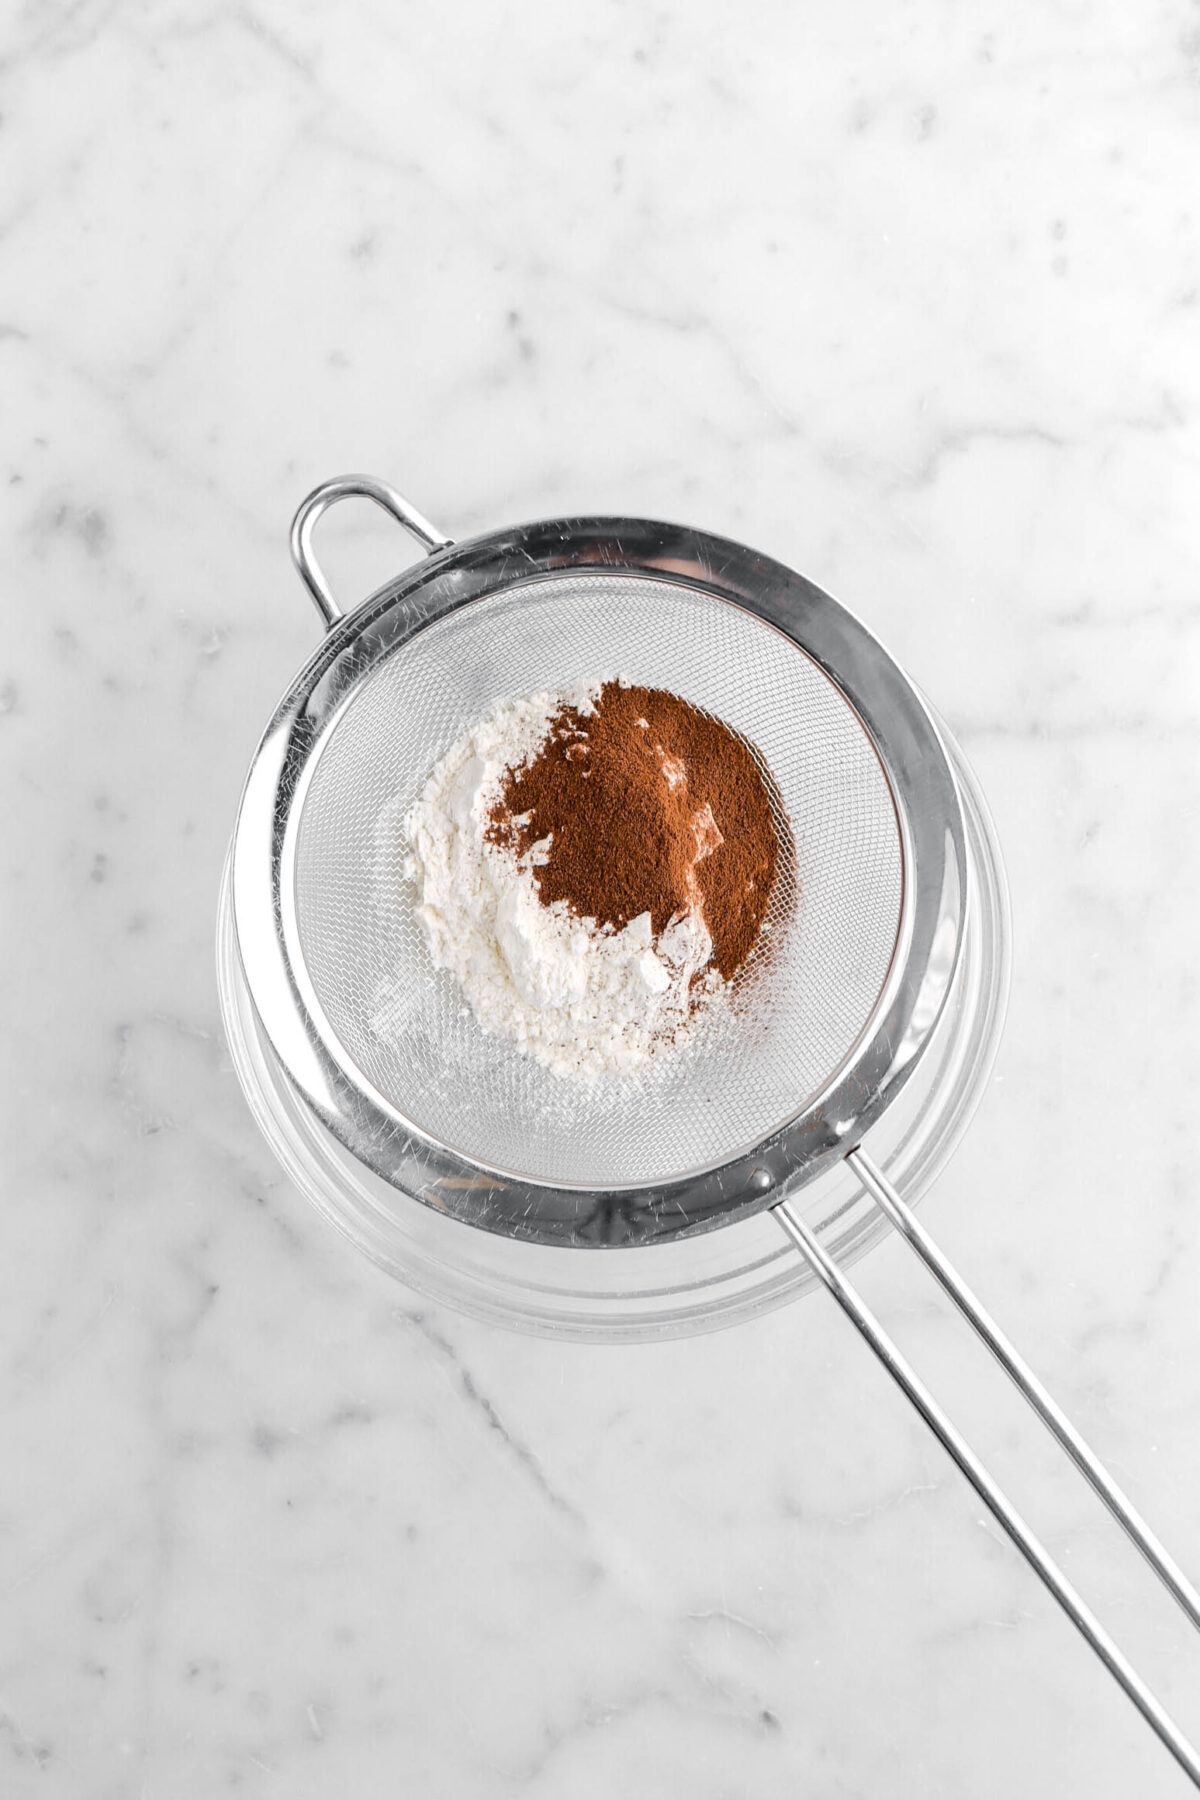 flour and espresso powder in sieve over glass bowl.